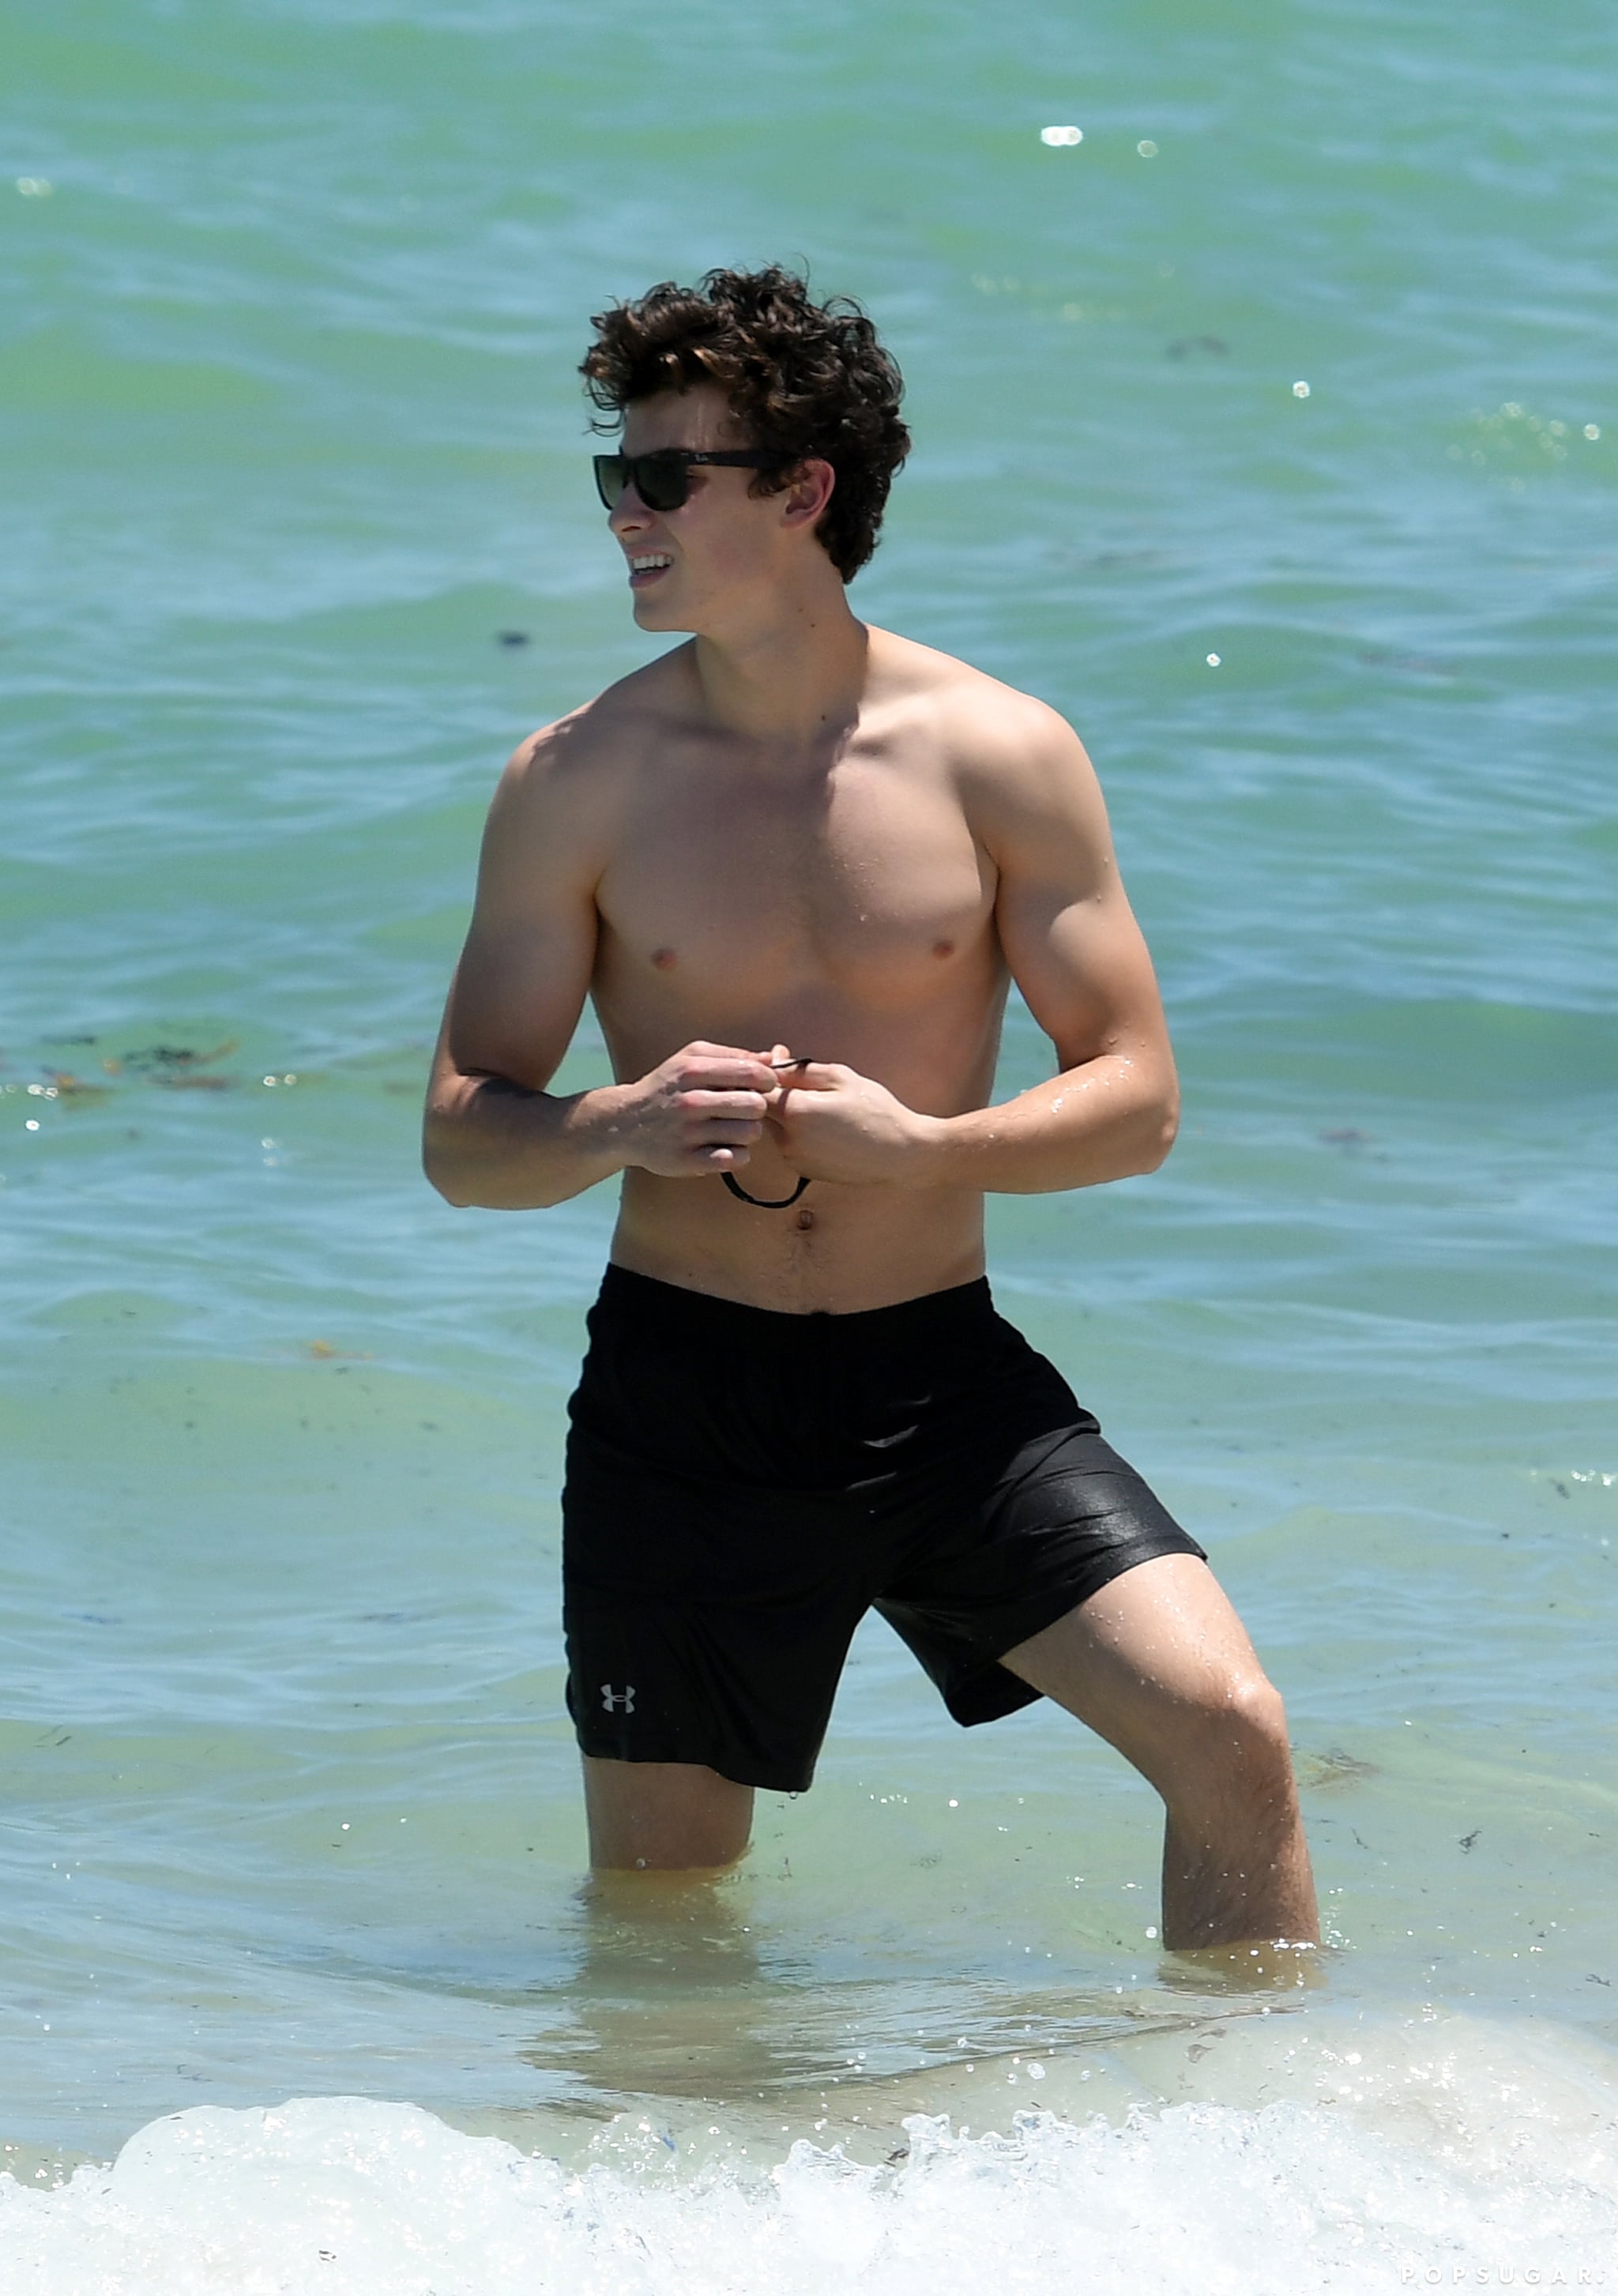 Celebrity Entertainment These Shirtless Shawn Mendes Photos